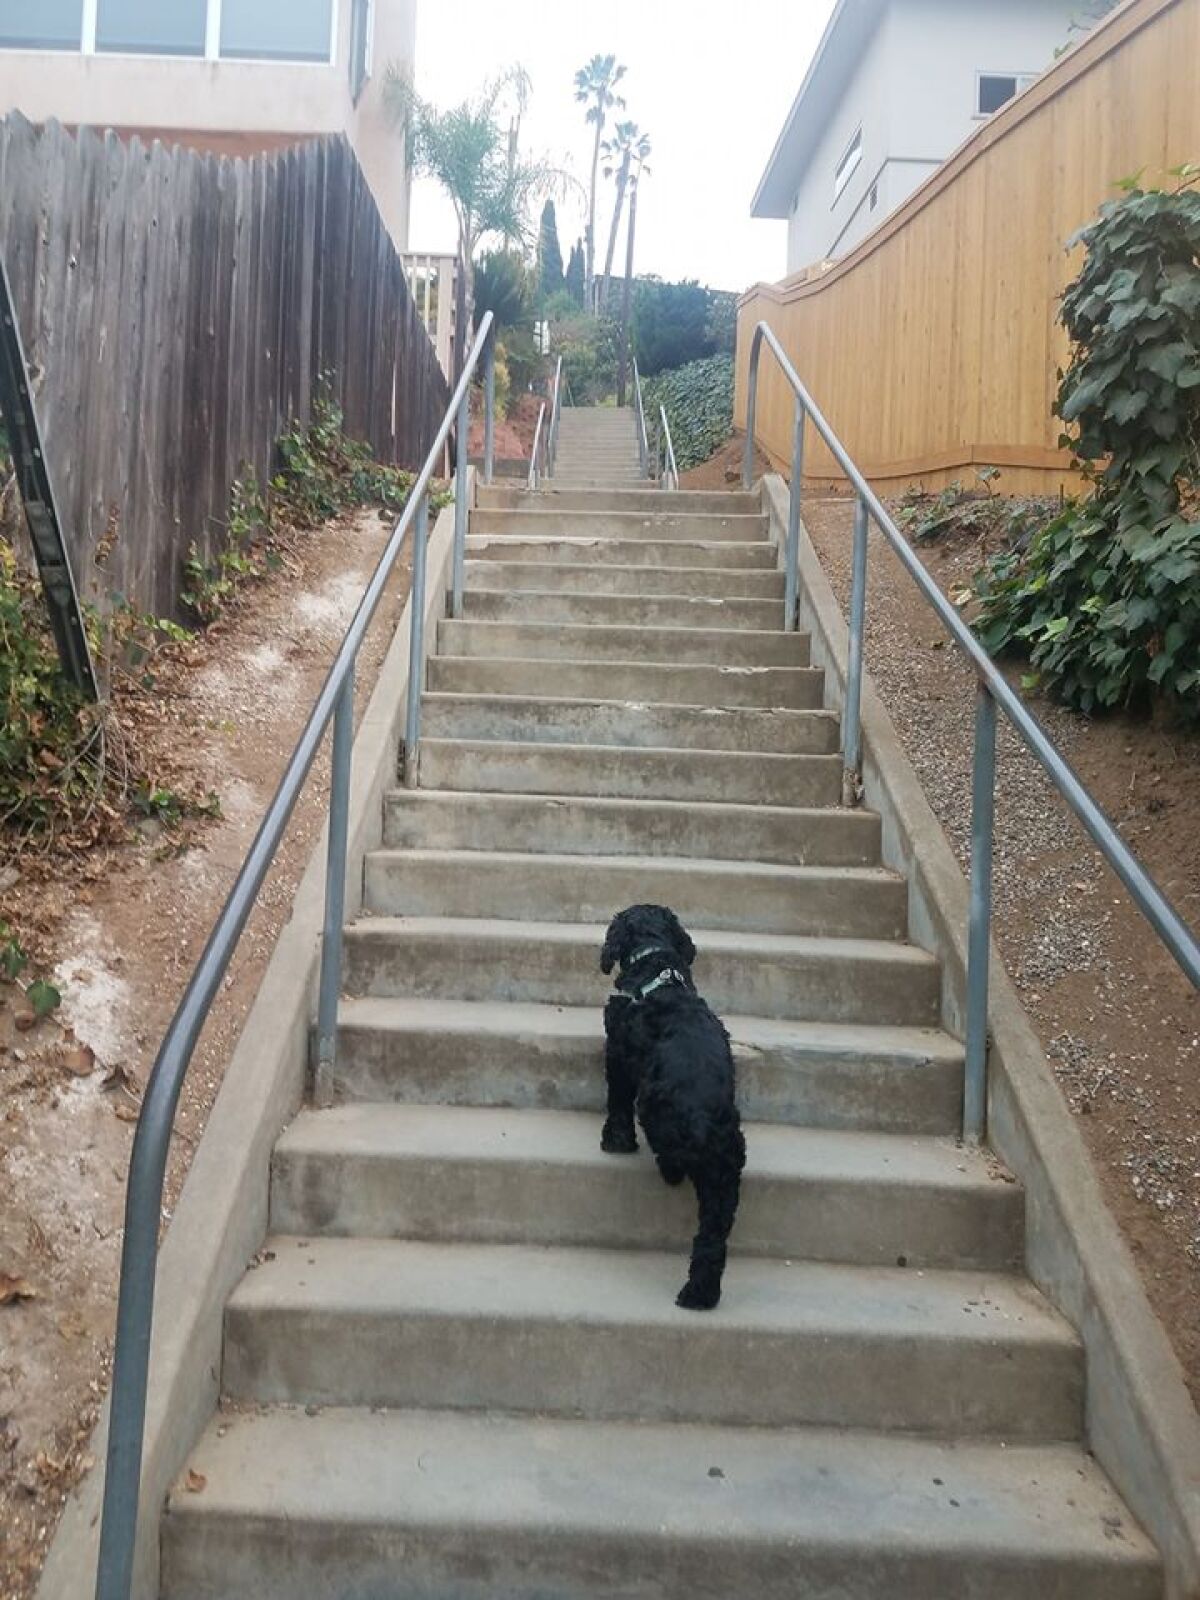 A dog goes up some of the "Secret Stairs" near downtown La Mesa in this file photo from 2018. The city of La Mesa has closed the popular exercise site as part of protecting gatherings of people during the coronavirus pandemic.